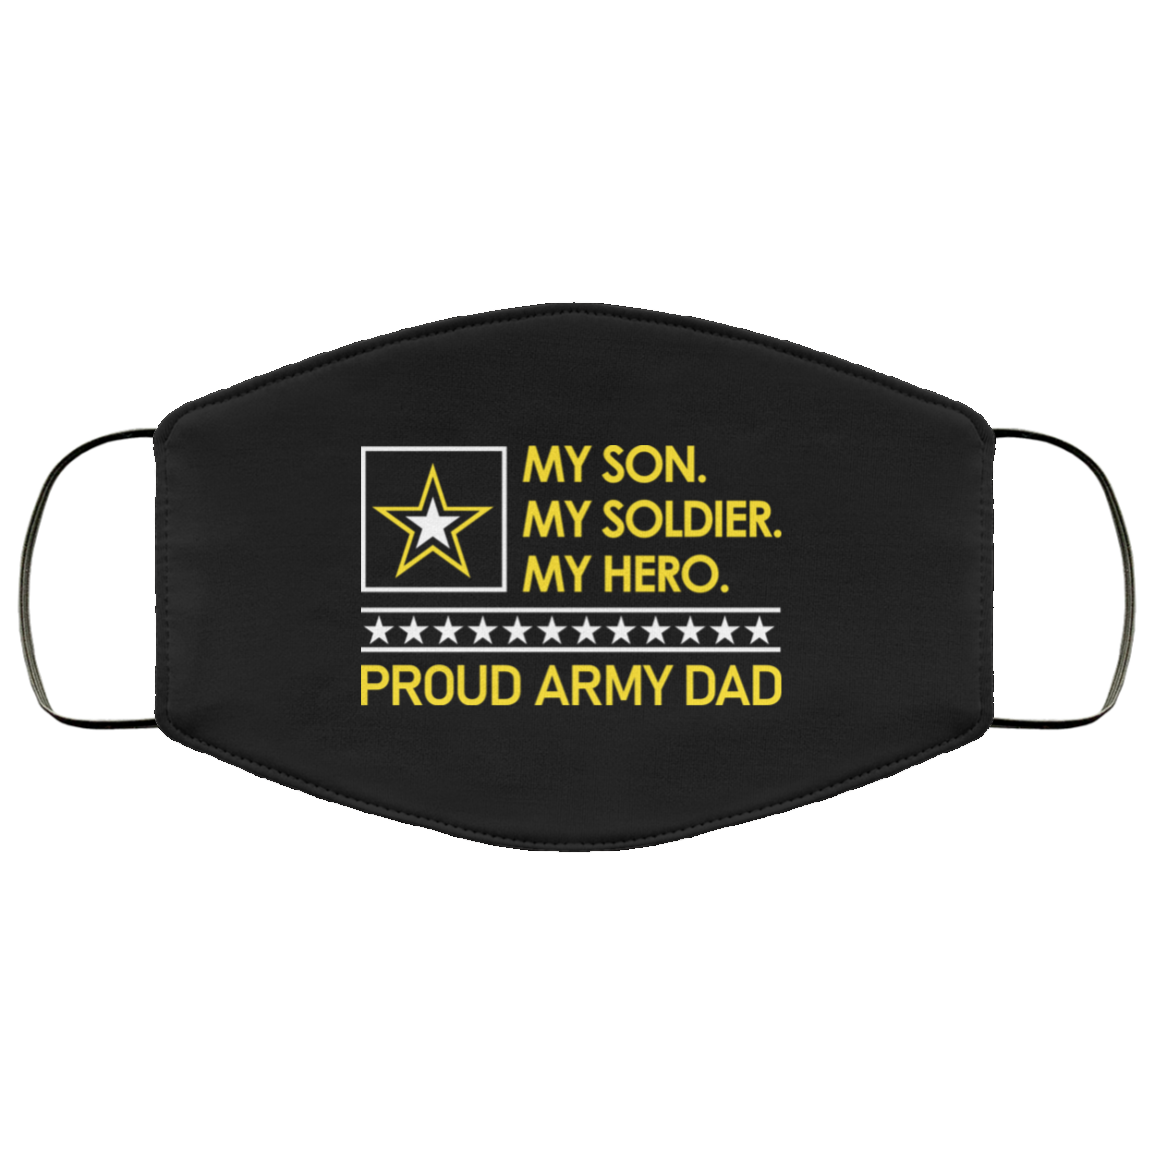 Order Proud Army Dad